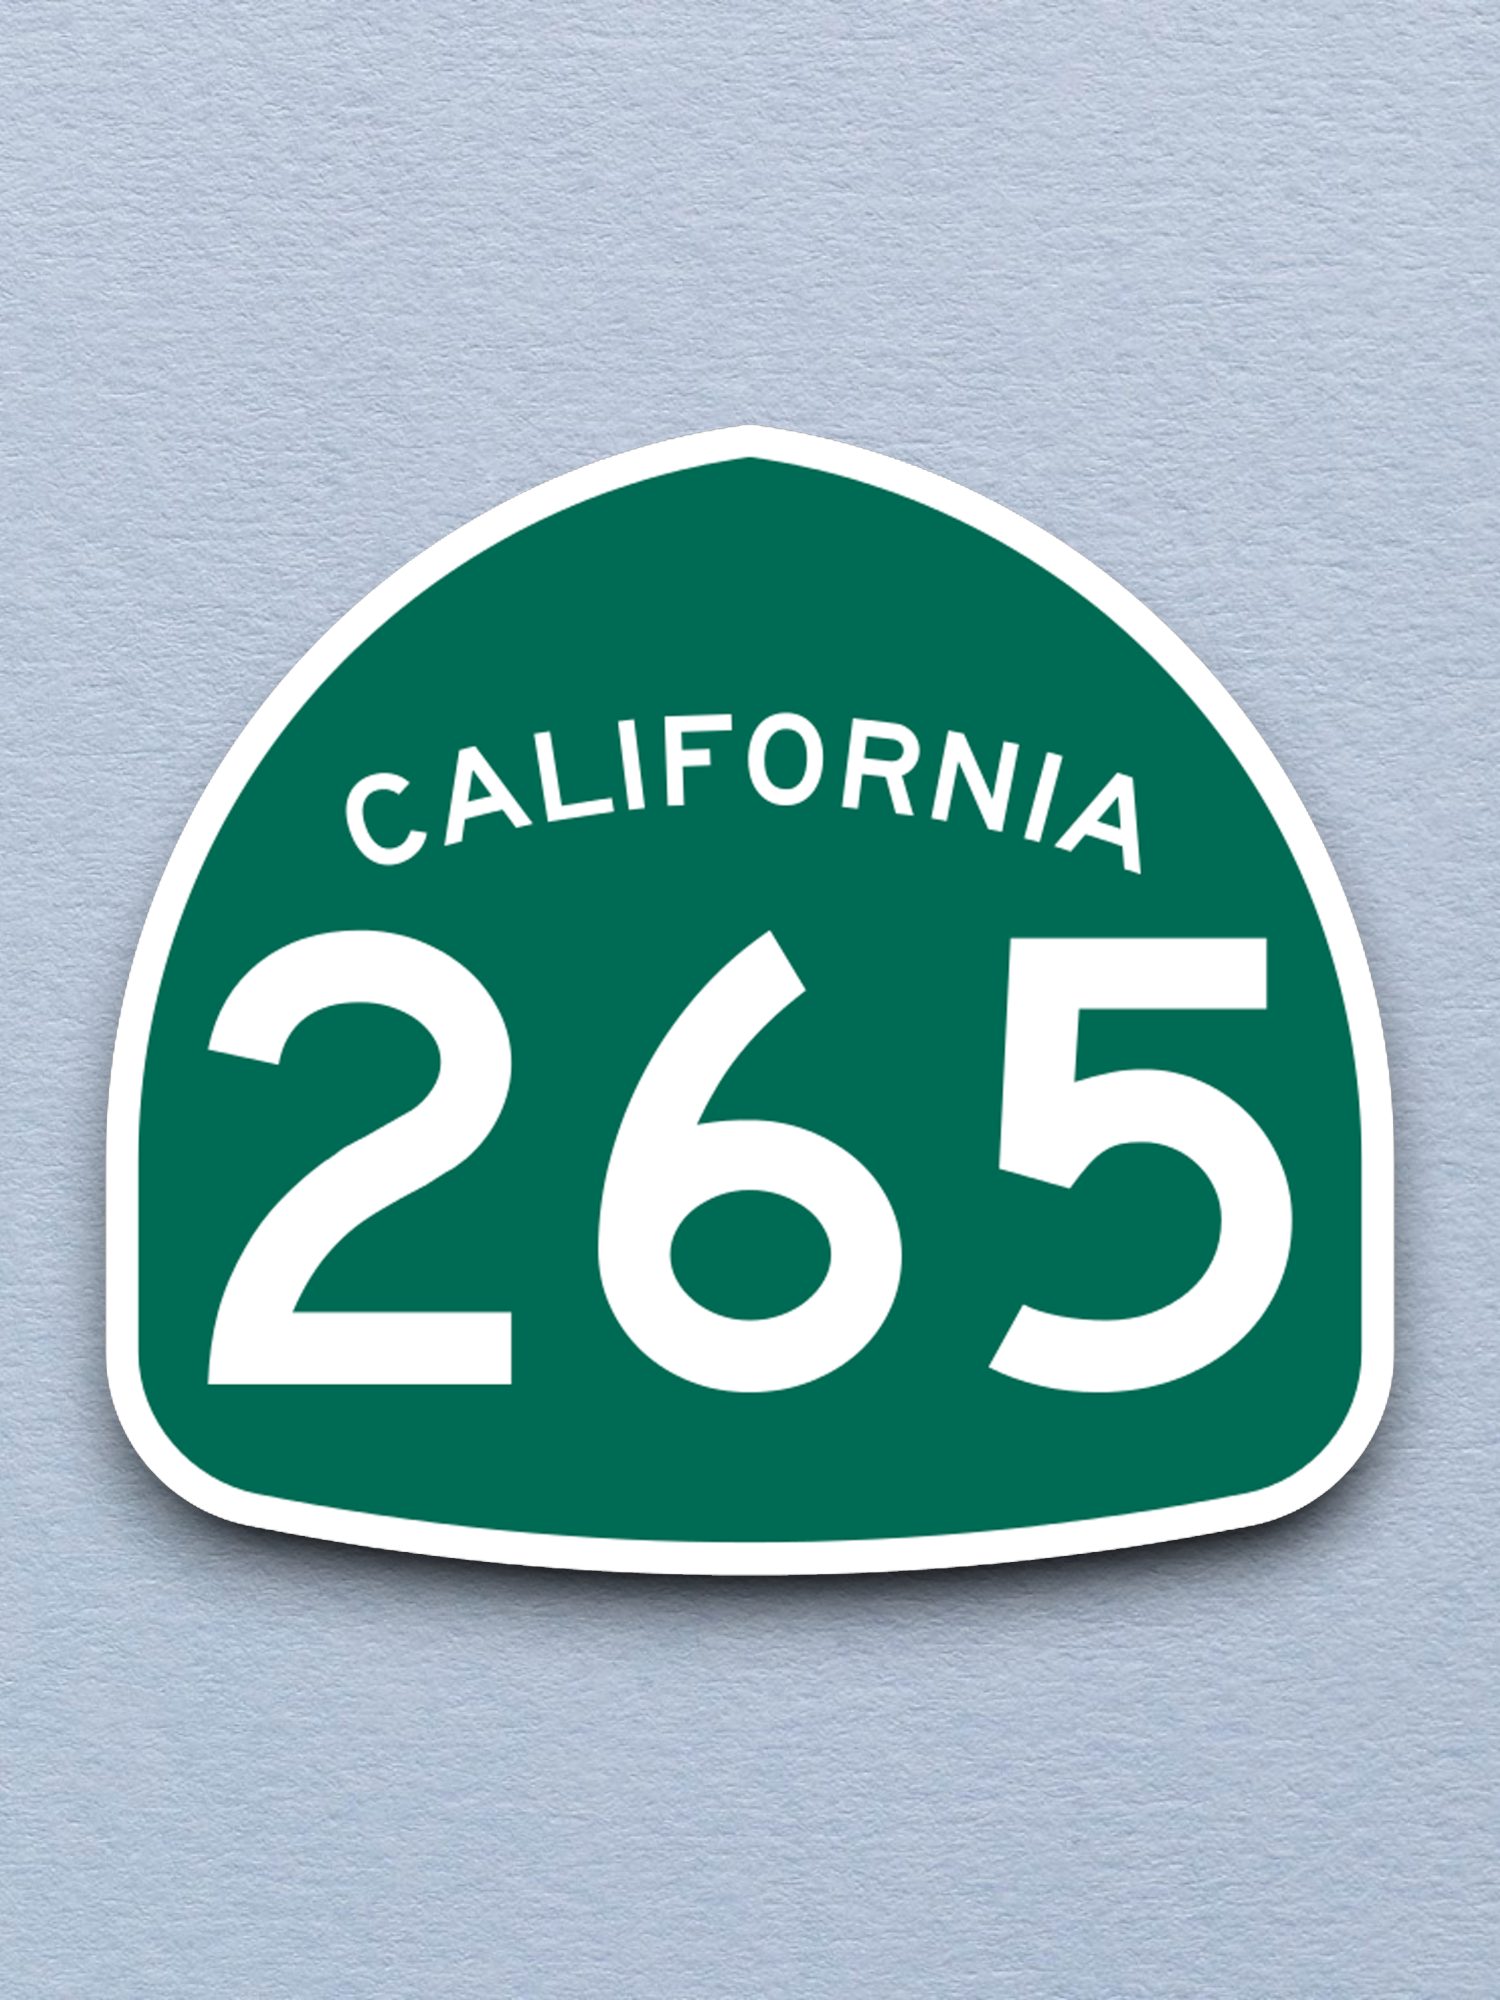 California State Route 265 Road Sign Sticker